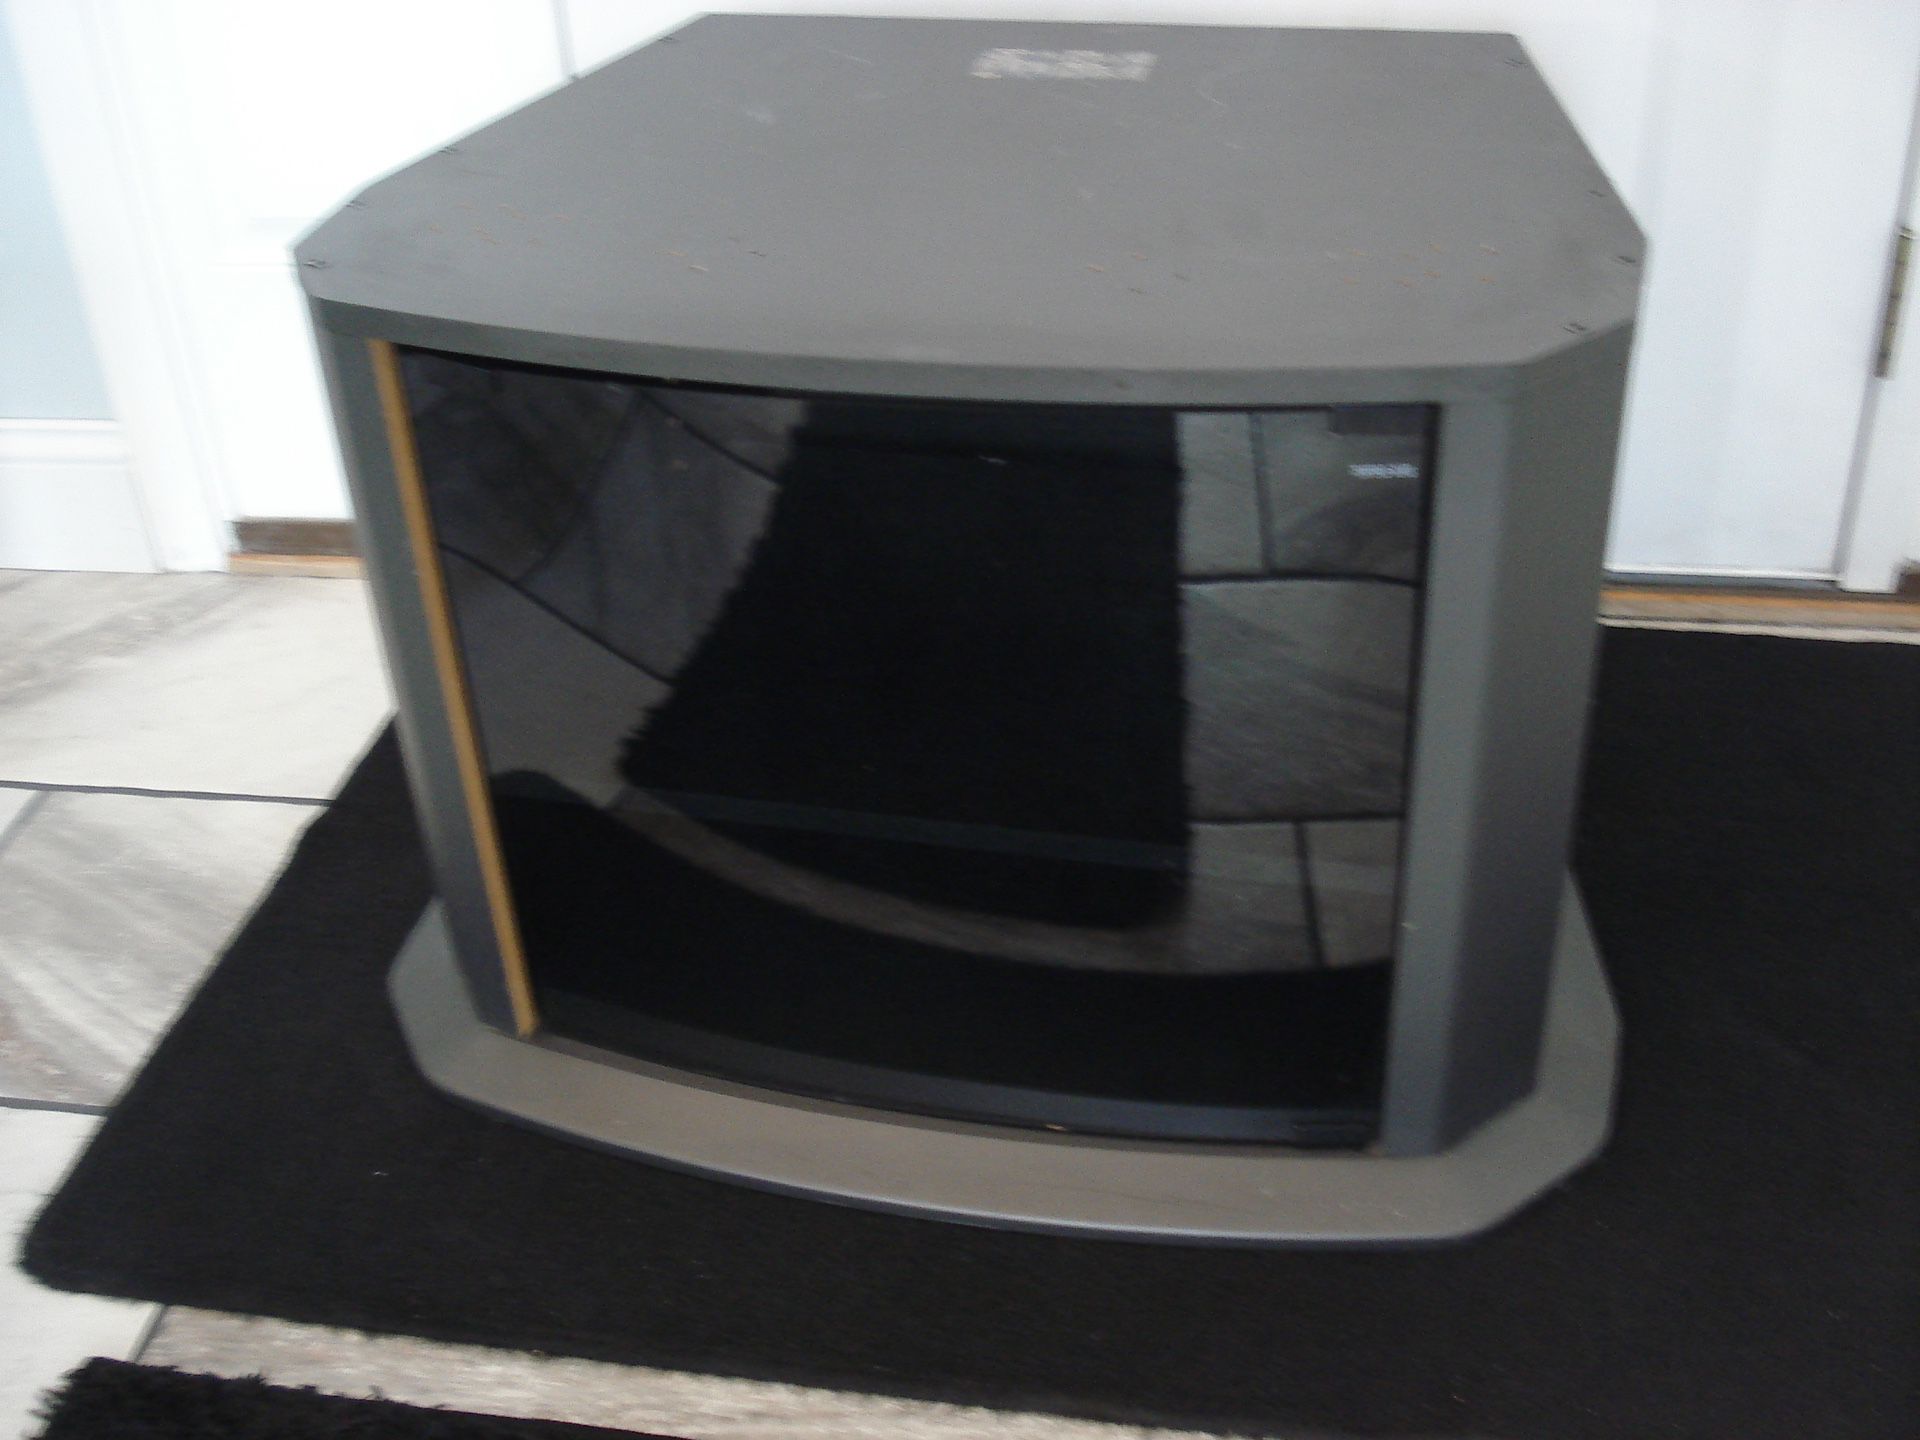 Sony TV Stand/Cabinet Model SU-27A3